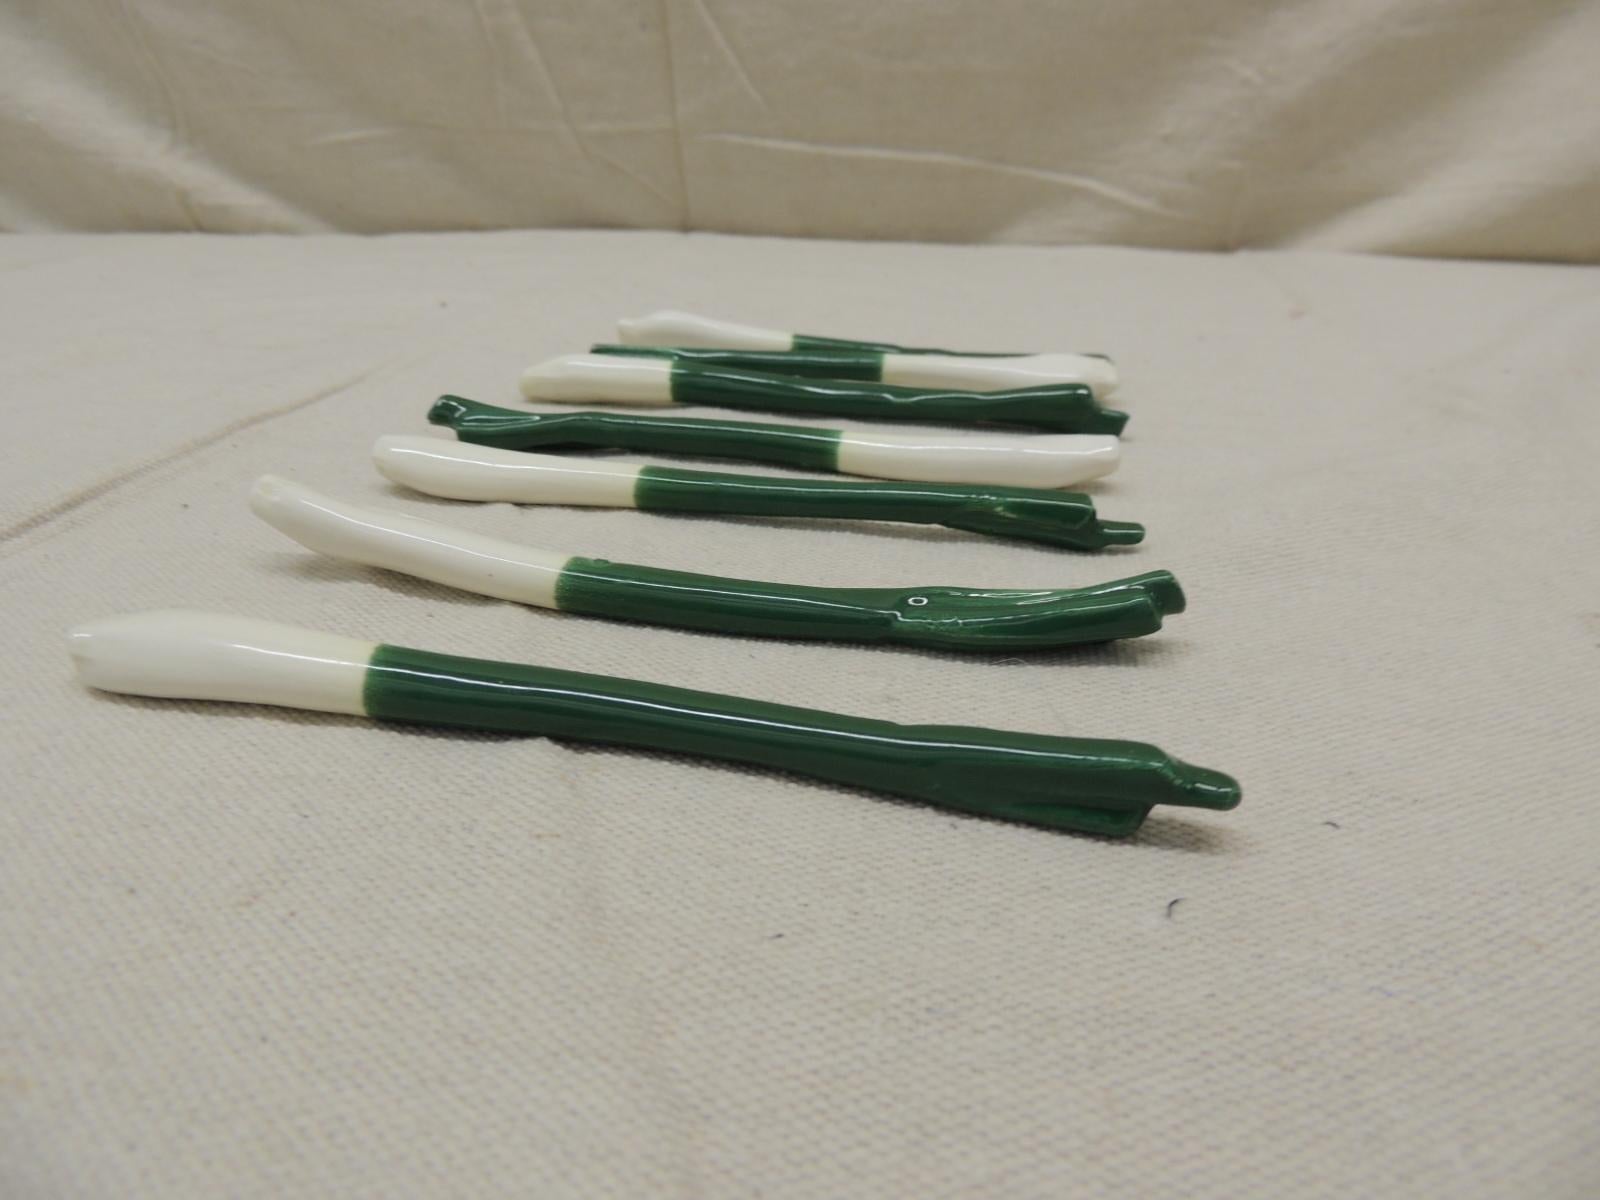 Vintage porcelain scallion onions drinks stirrers.
Green and white stirrers, ideal for bloody Mary's (CHEERS)
Size: 6